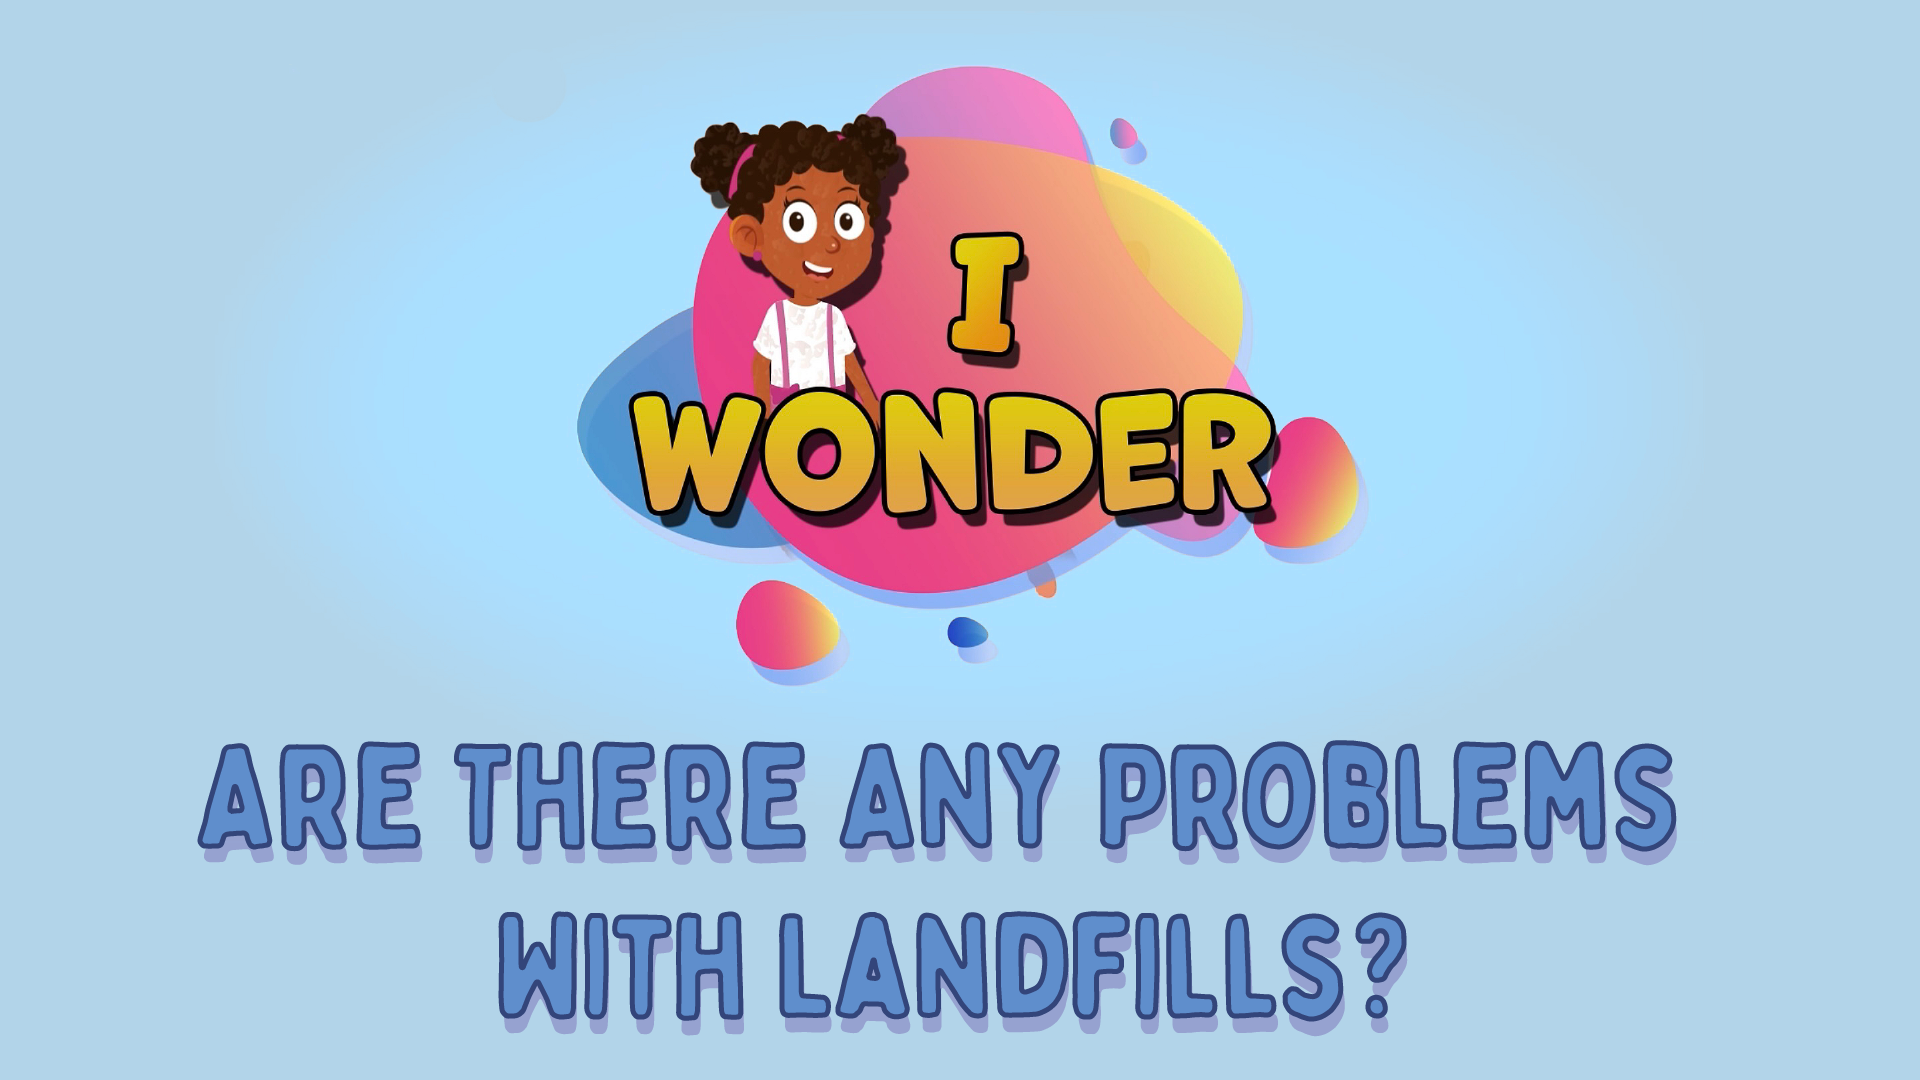 Are There Any Problems With Landfills?